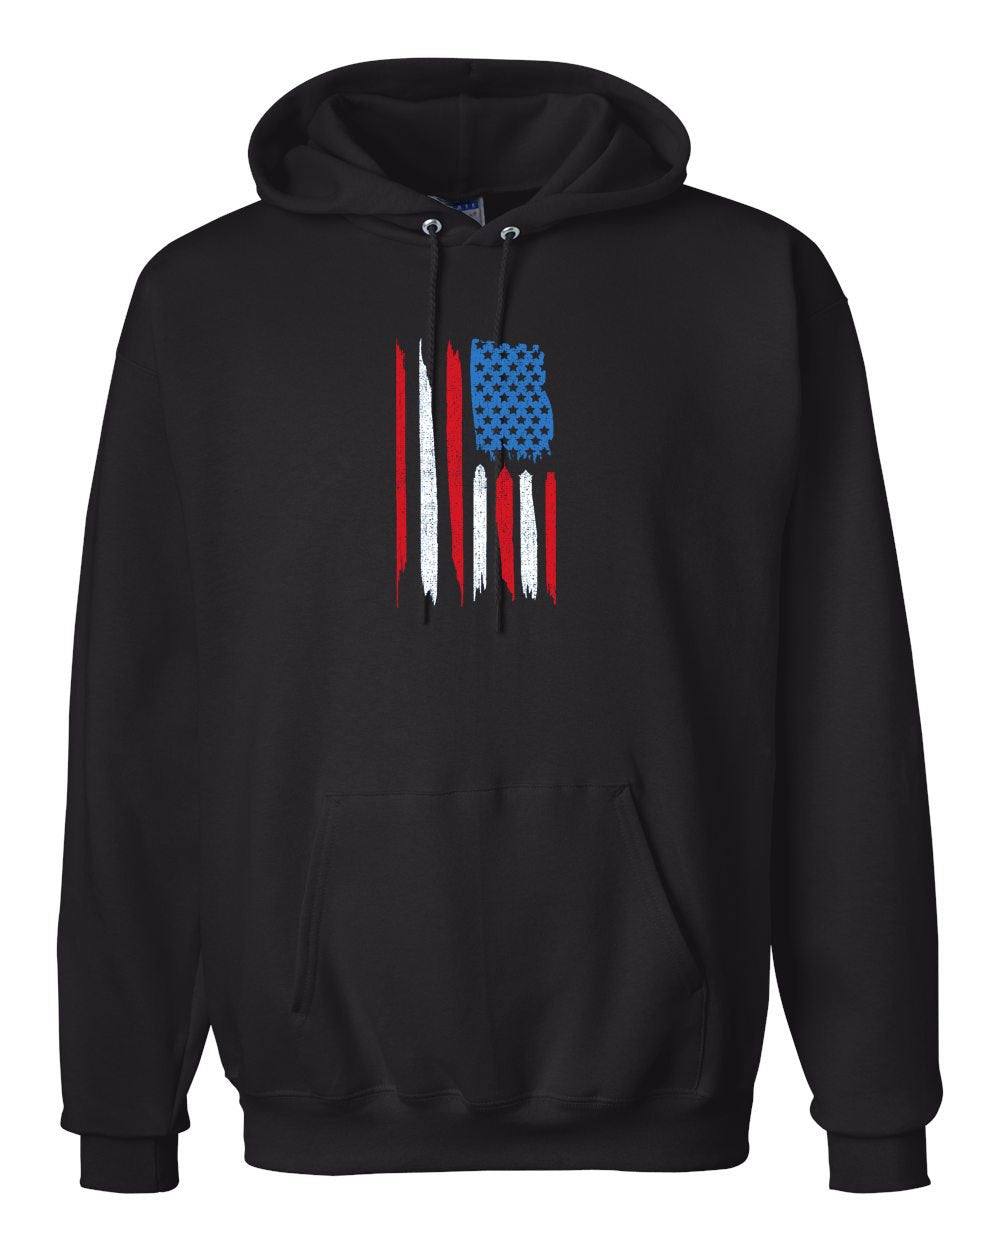 Philly City Flag Hoodie